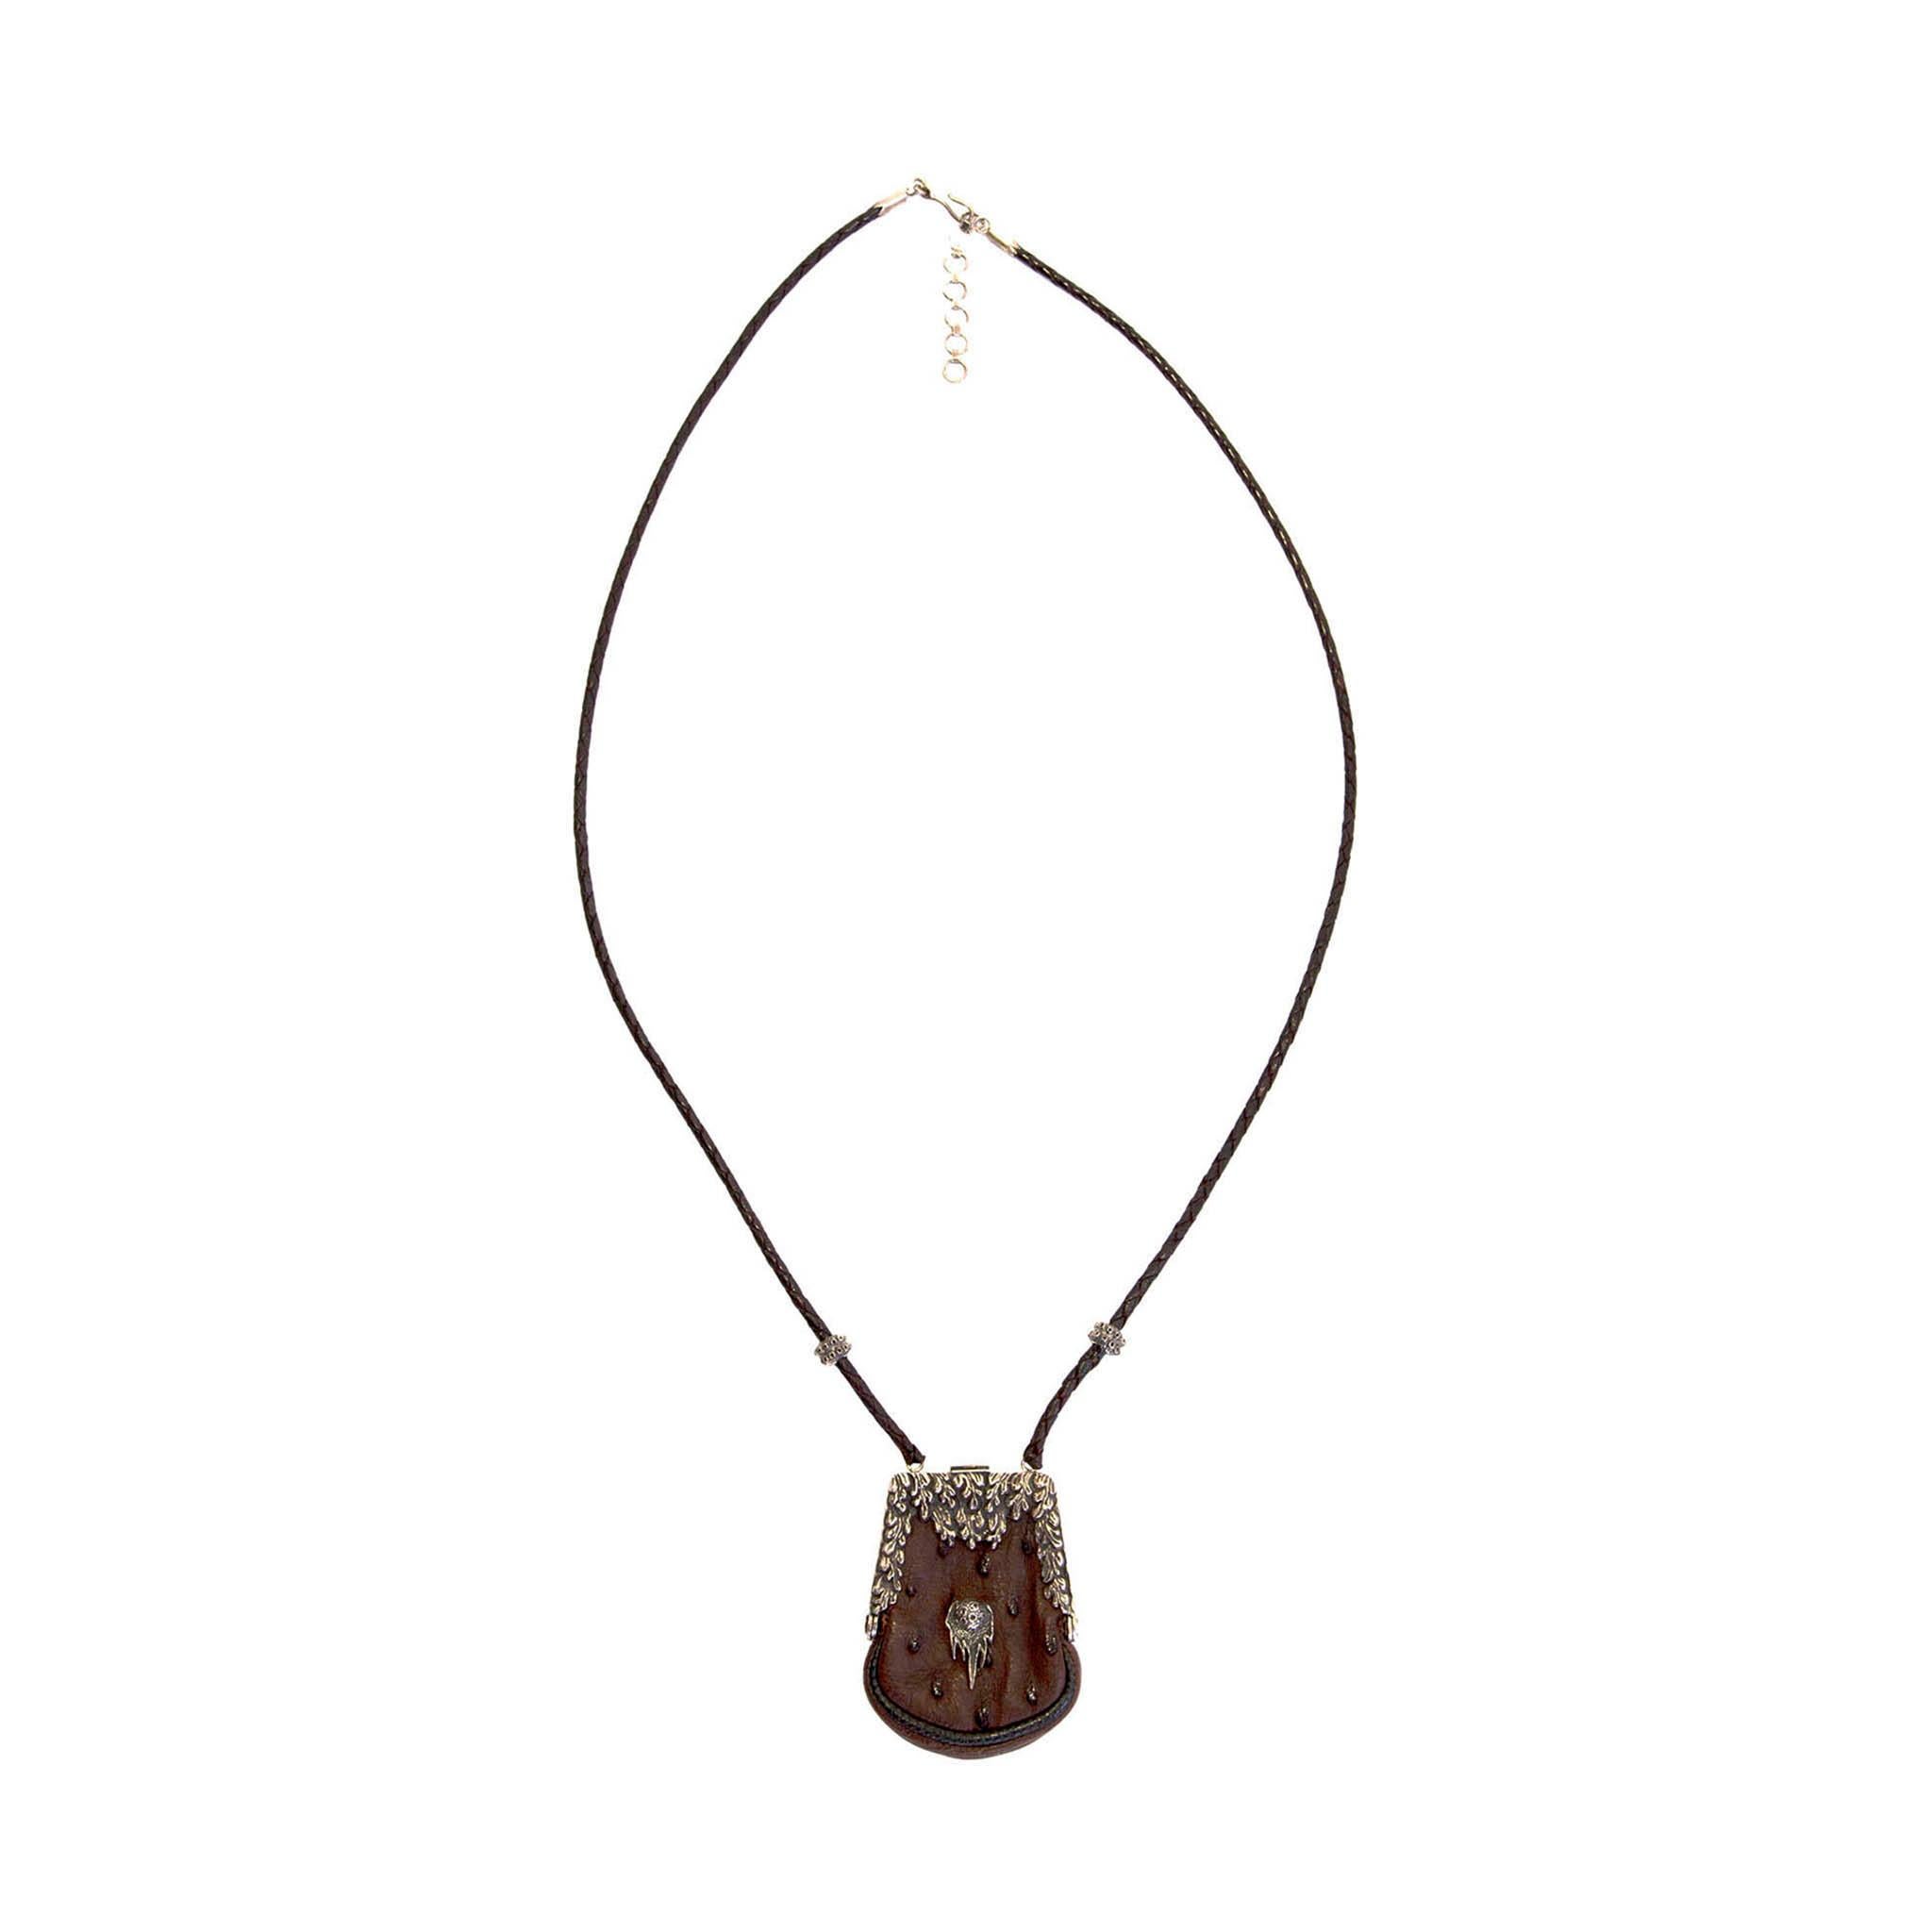 Product Details: Lou Guerin - 'Rare' - Coin Purse / Necklace - Silver Detailing Throughout - Plaited Leather Necklace - Adjustable Fasten.
Label: Lou Guerin
Fabric Content: Leather / Silver 
Condition: New - Rare Collectors Piece 
Necklace Length: